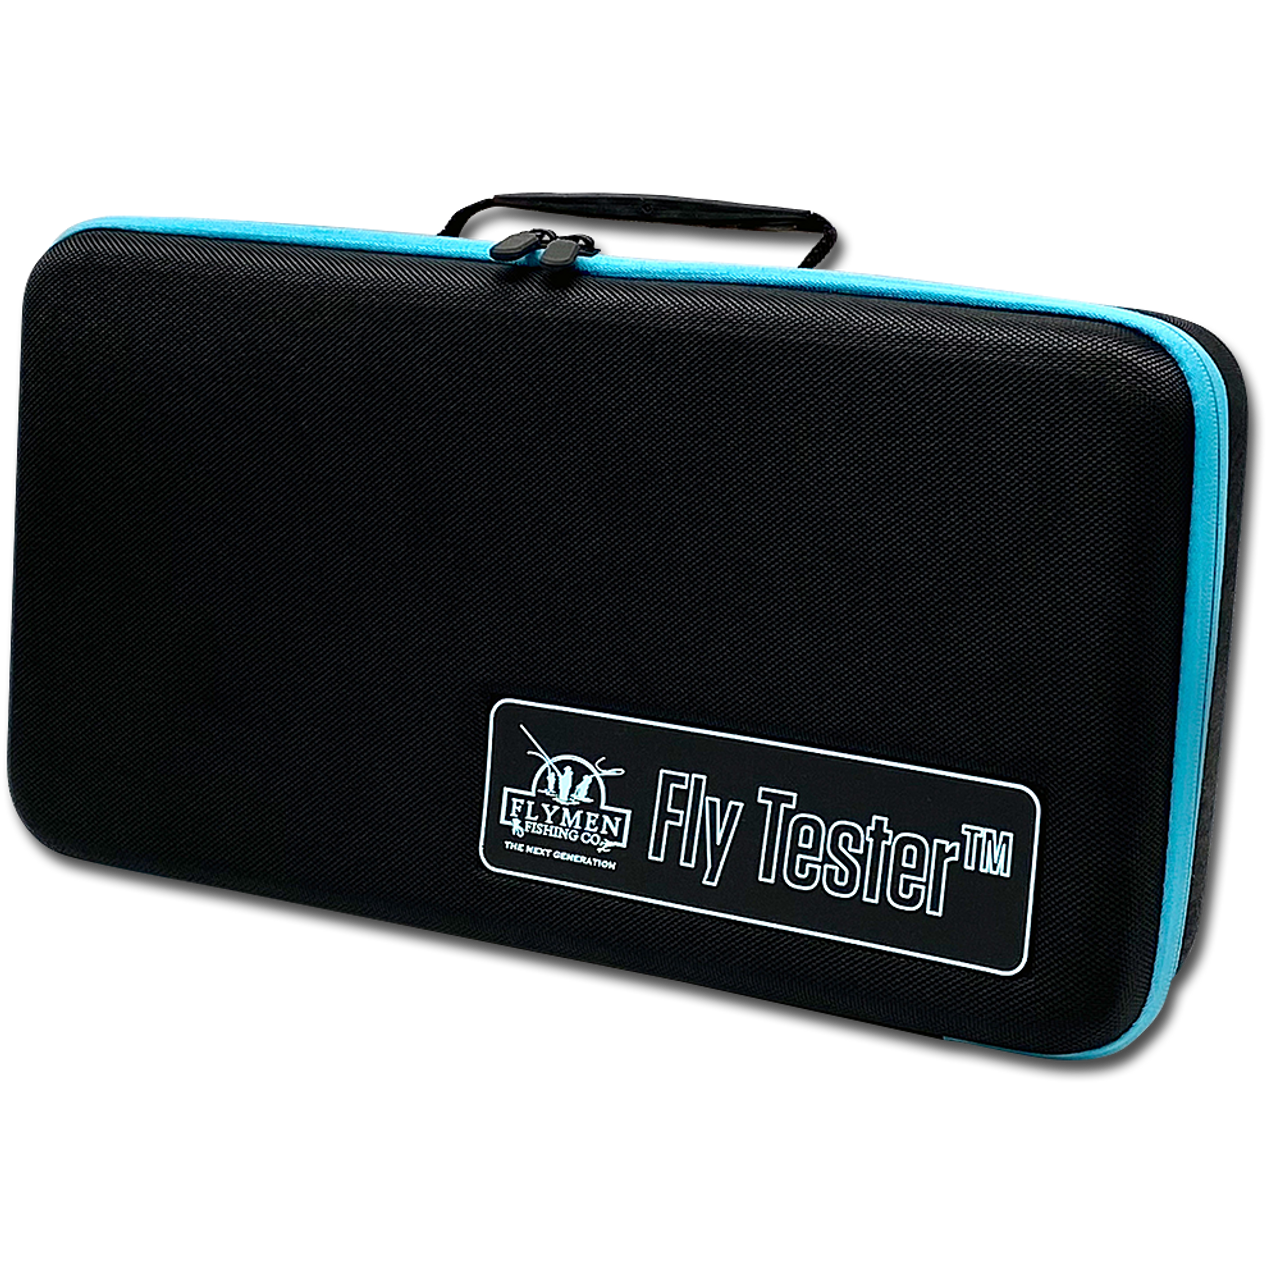 Fly Tester™ carrying case